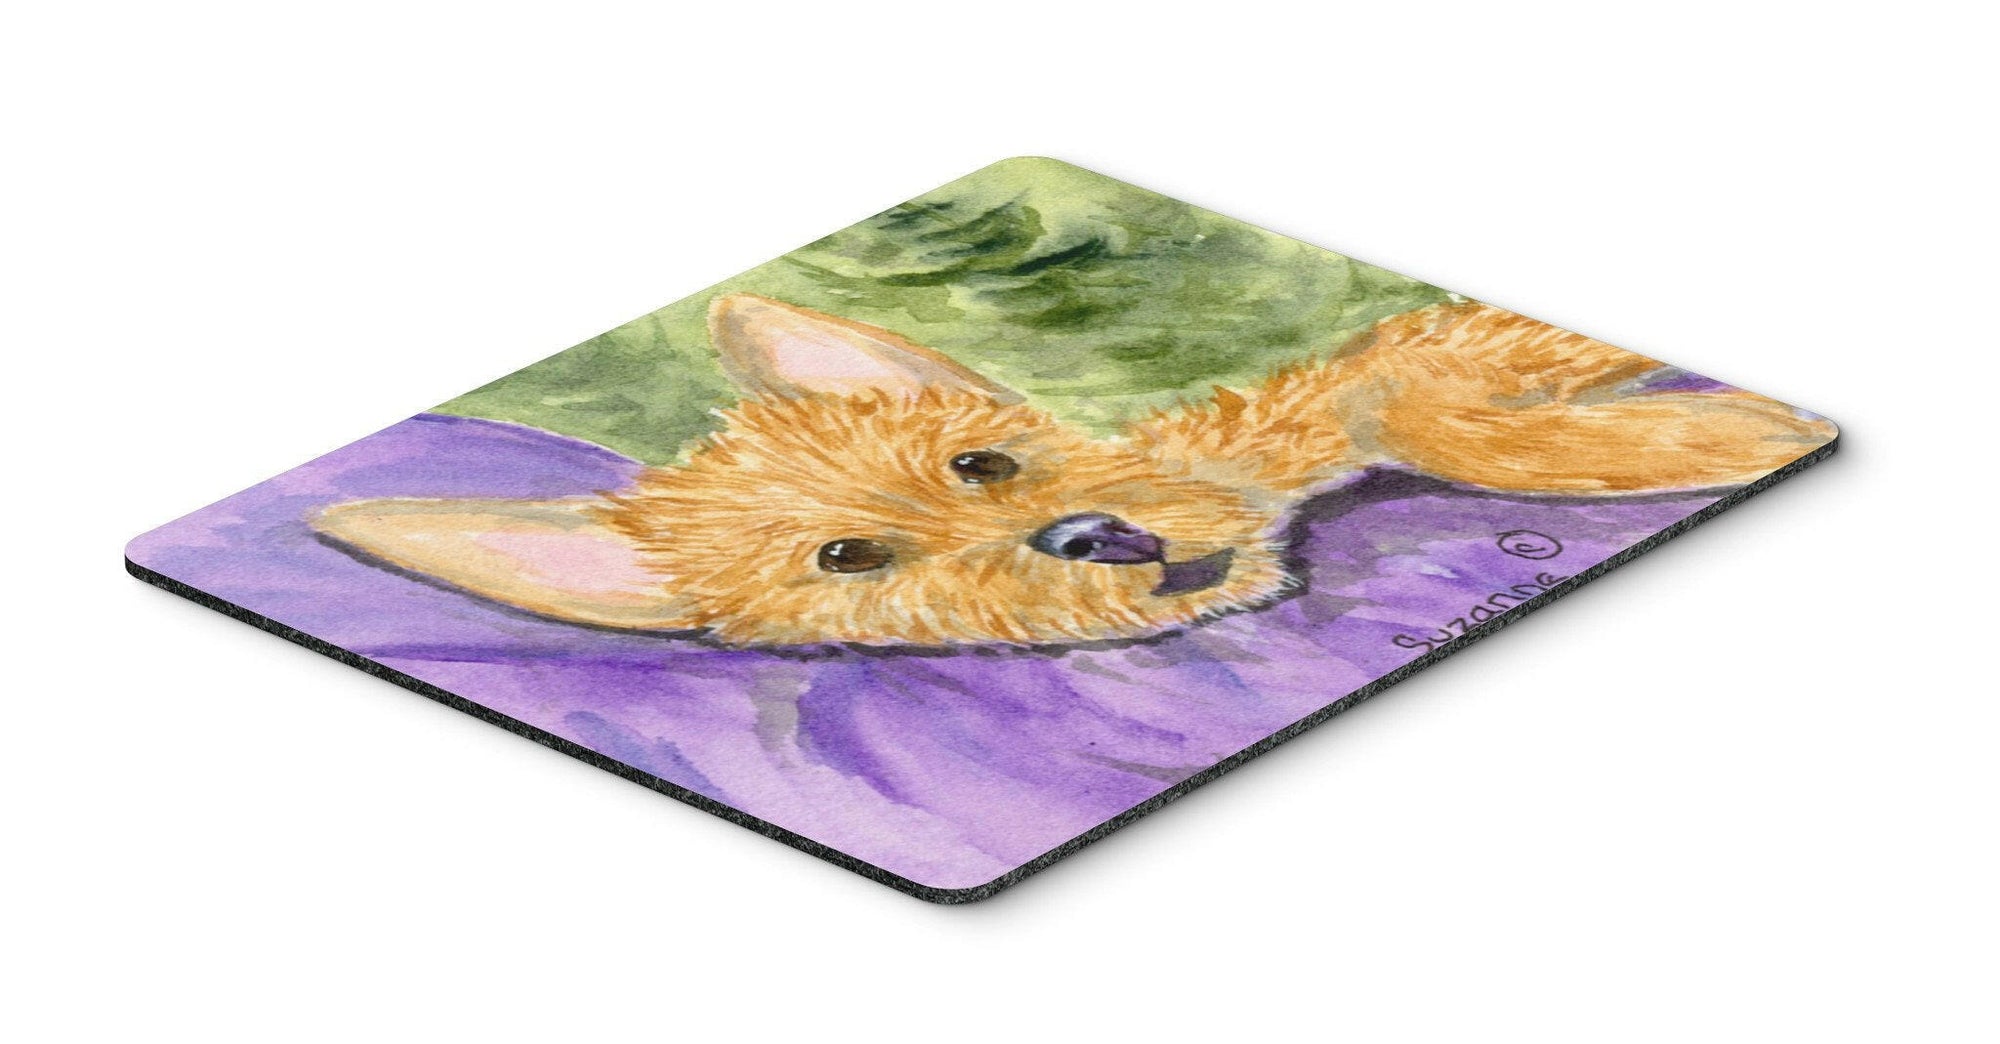 Norwich Terrier Mouse pad, hot pad, or trivet by Caroline's Treasures